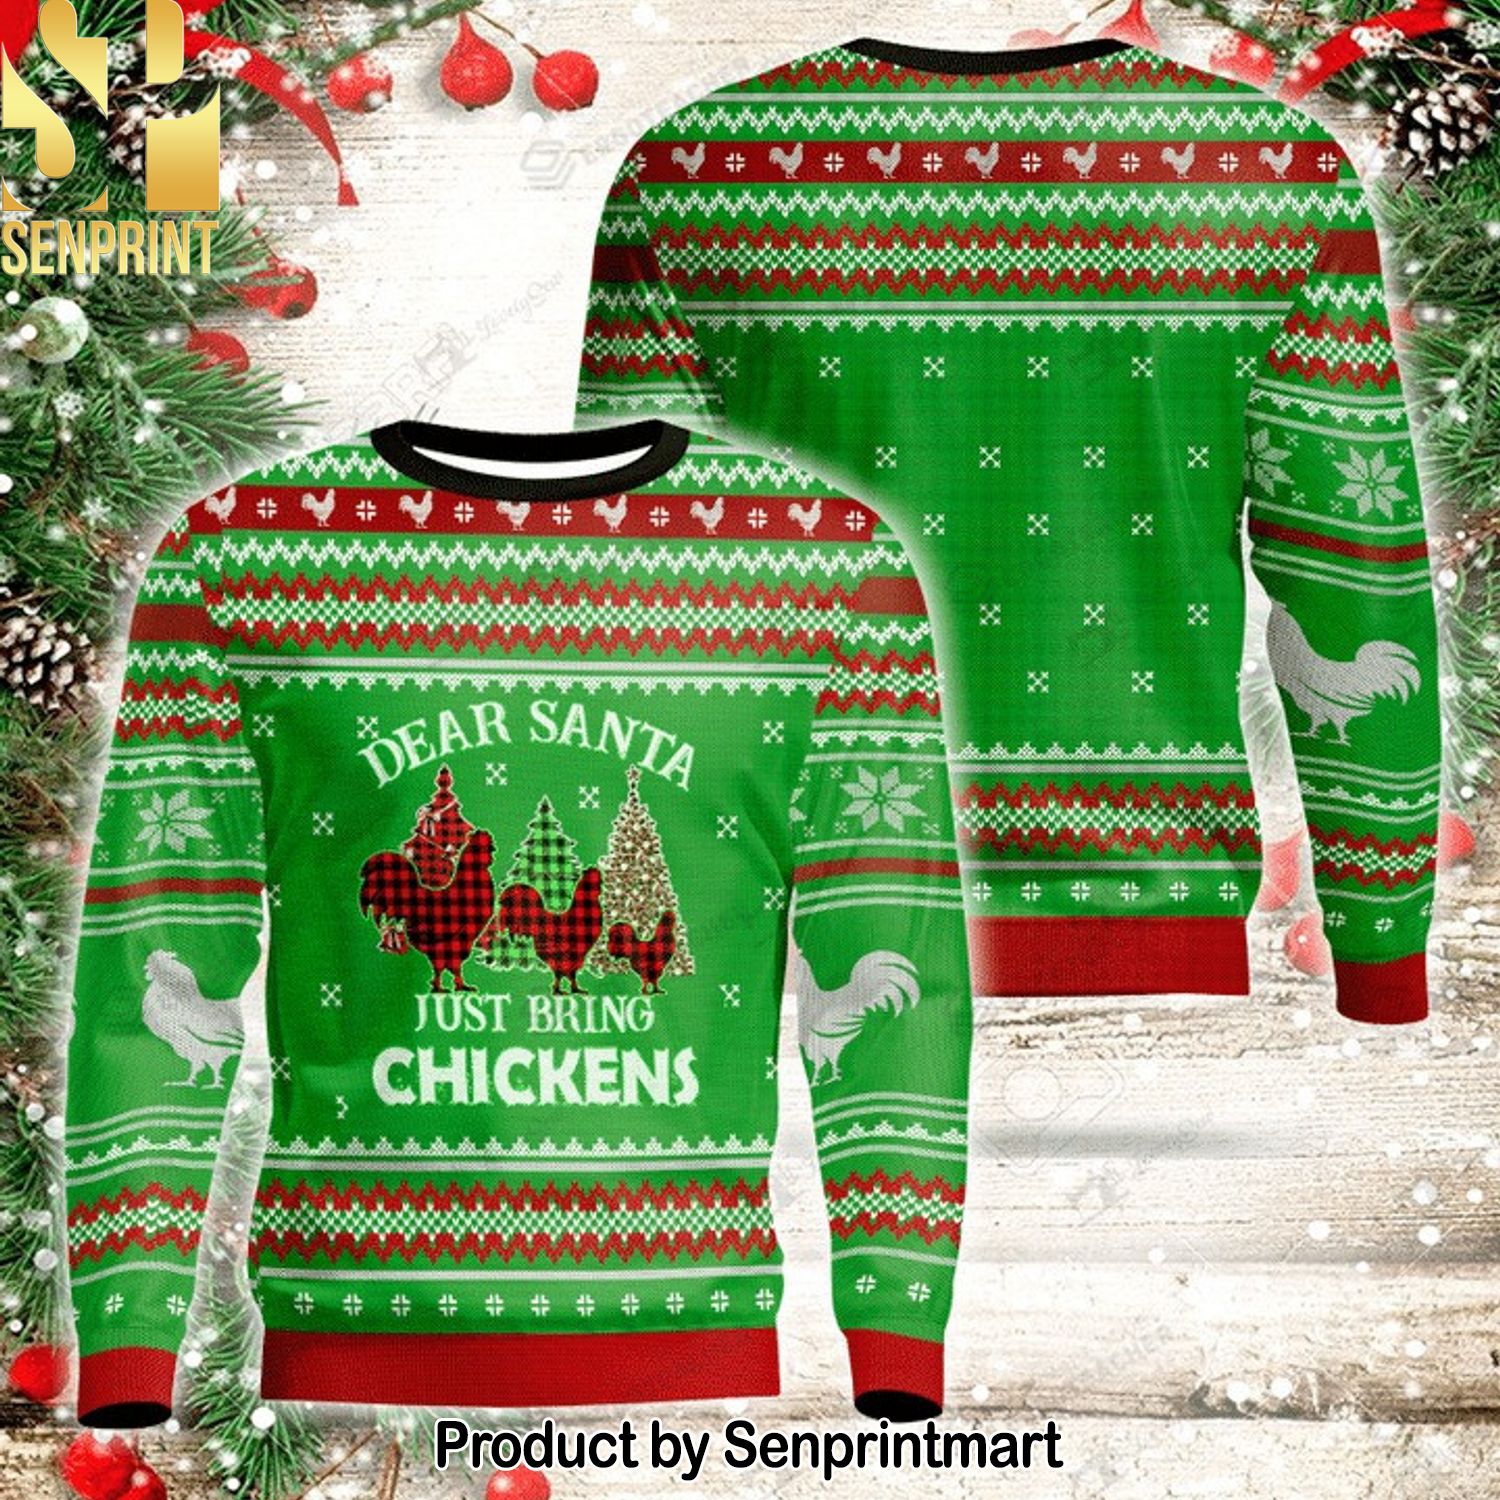 Dear Santa Just Bring Chickens For Christmas Gifts Ugly Christmas Wool Knitted Sweater